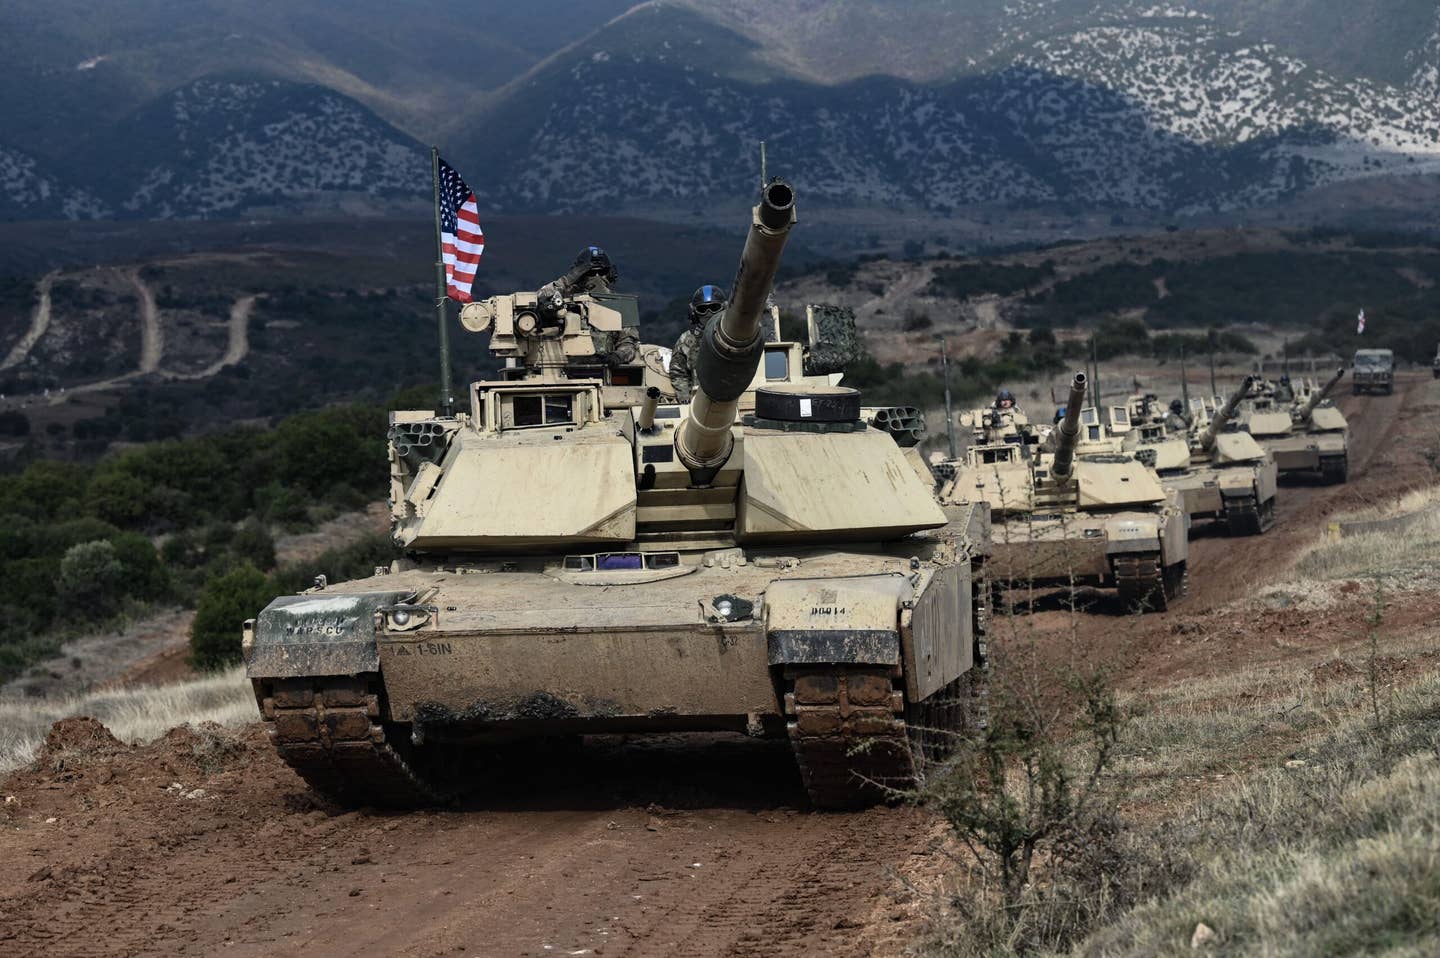 M1 Abrams tanks are assigned to Armor Brigade Combat Teams. (Photo by SAKIS MITROLIDIS/AFP via Getty Images)